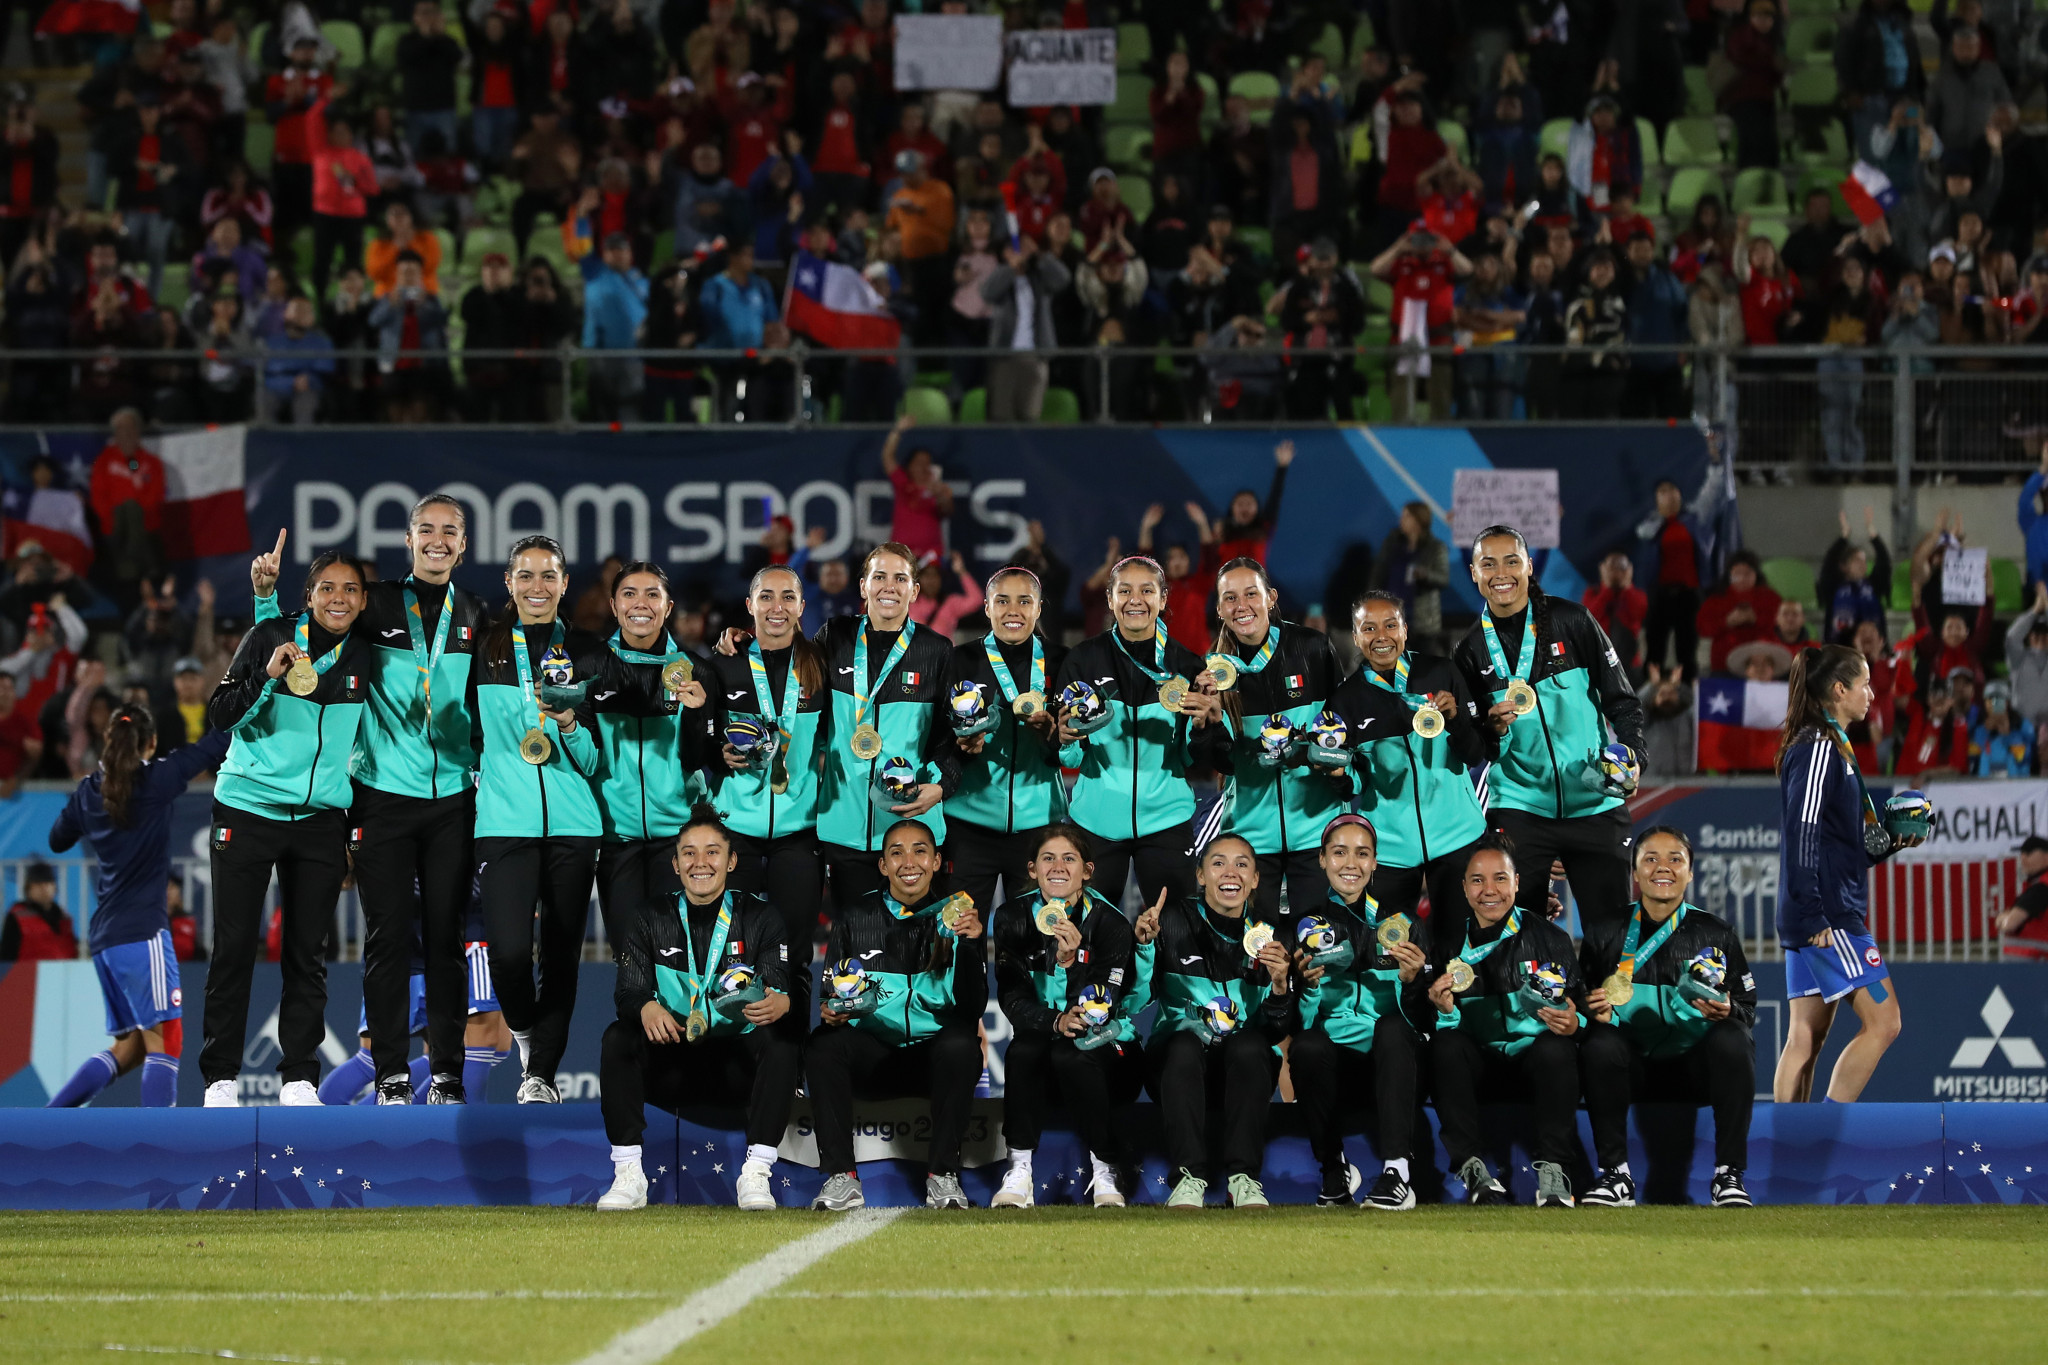 México makes history with its first Pan American gold in women's football against Chile with a forward in goal